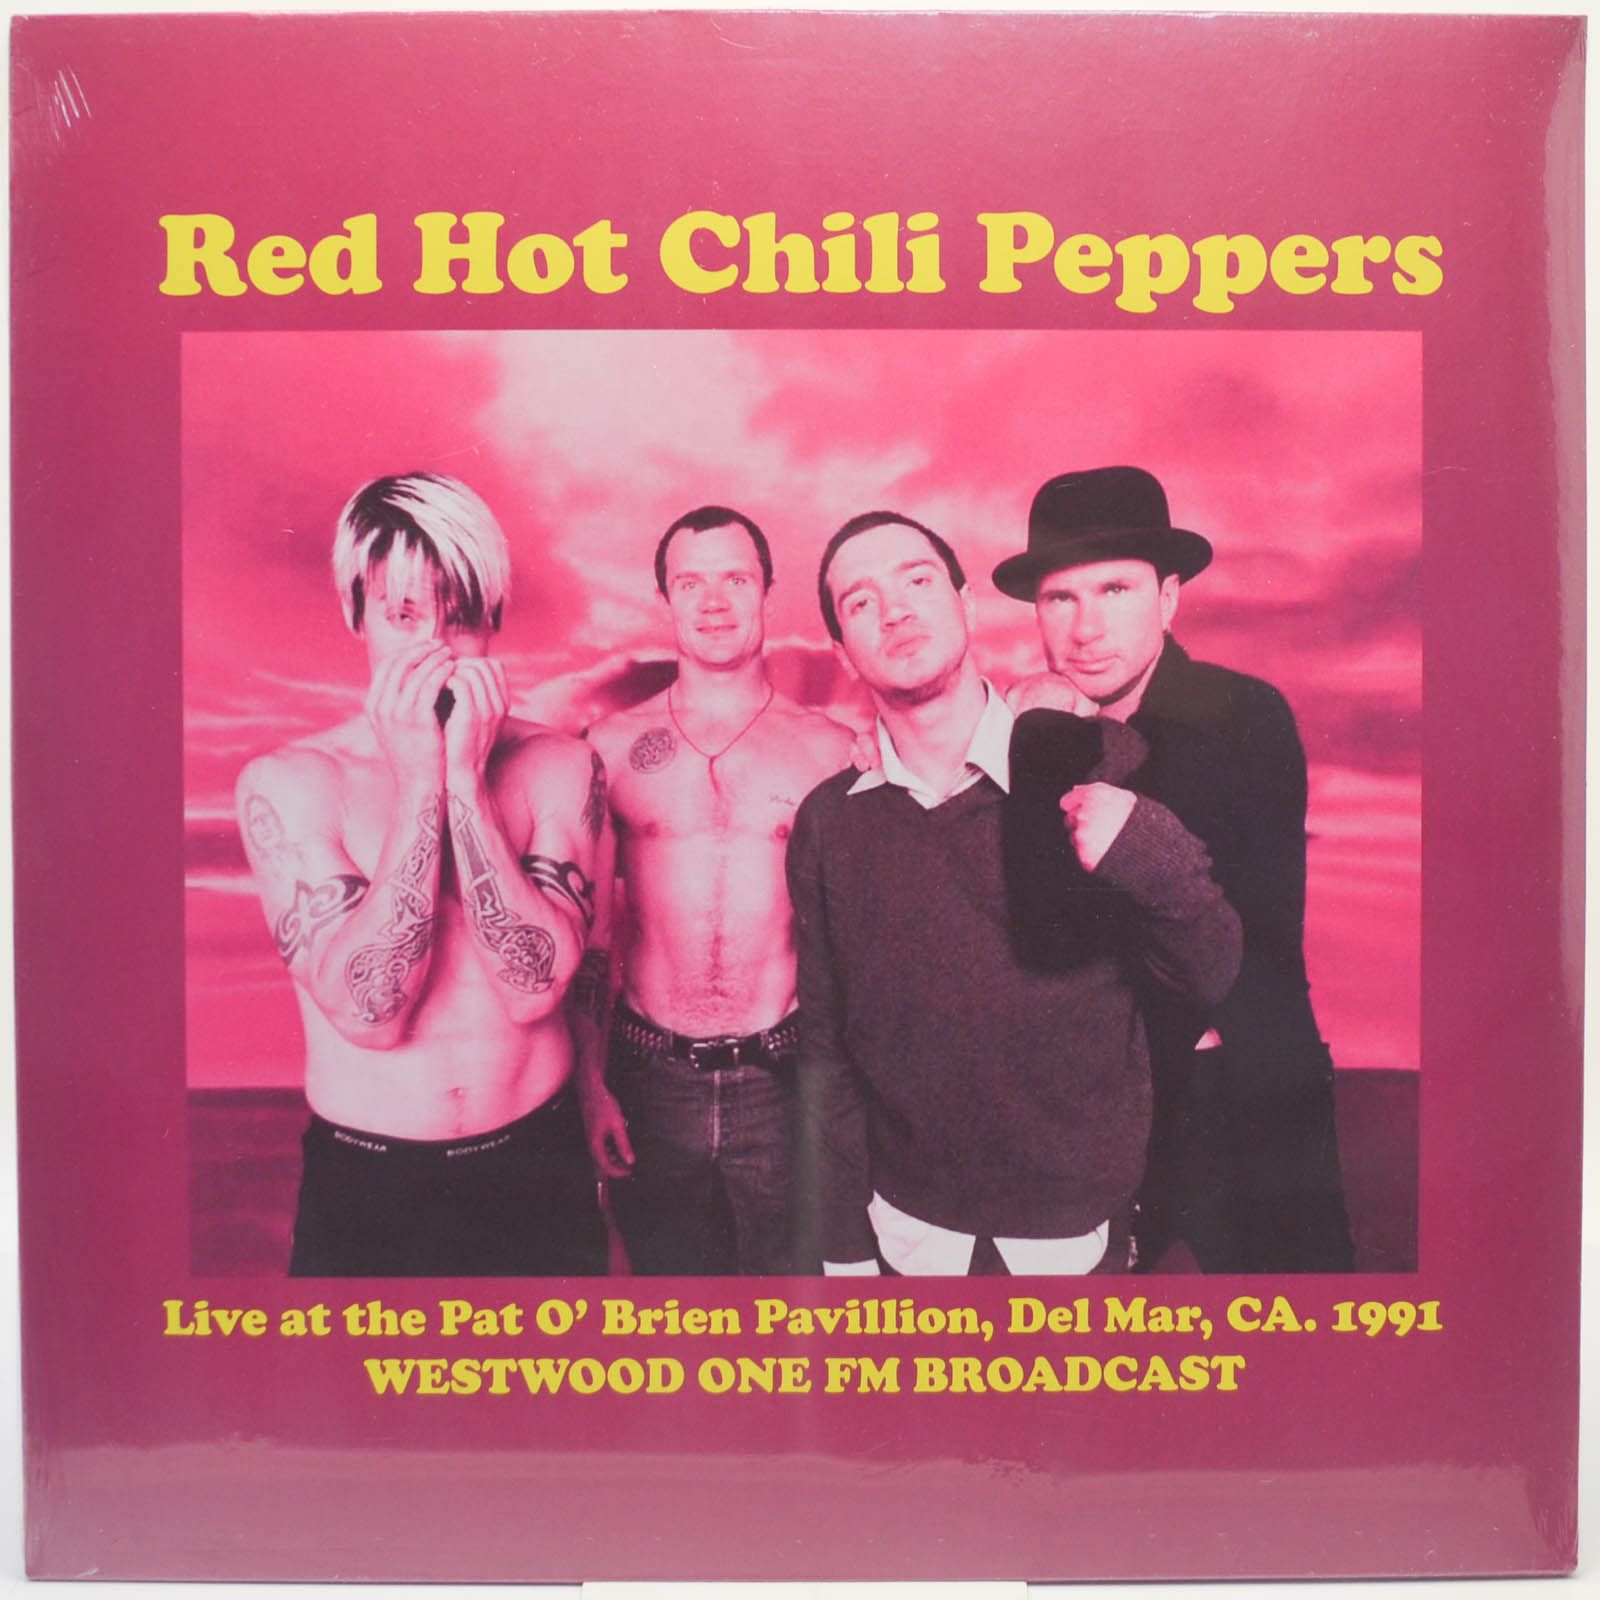 Red hot chili peppers give it away. Ред хот Чили Пепперс Вудсток. Red hot Chili Peppers обложка. RHCP обложки альбомов. Red hot Chili Peppers обложки альбомов.